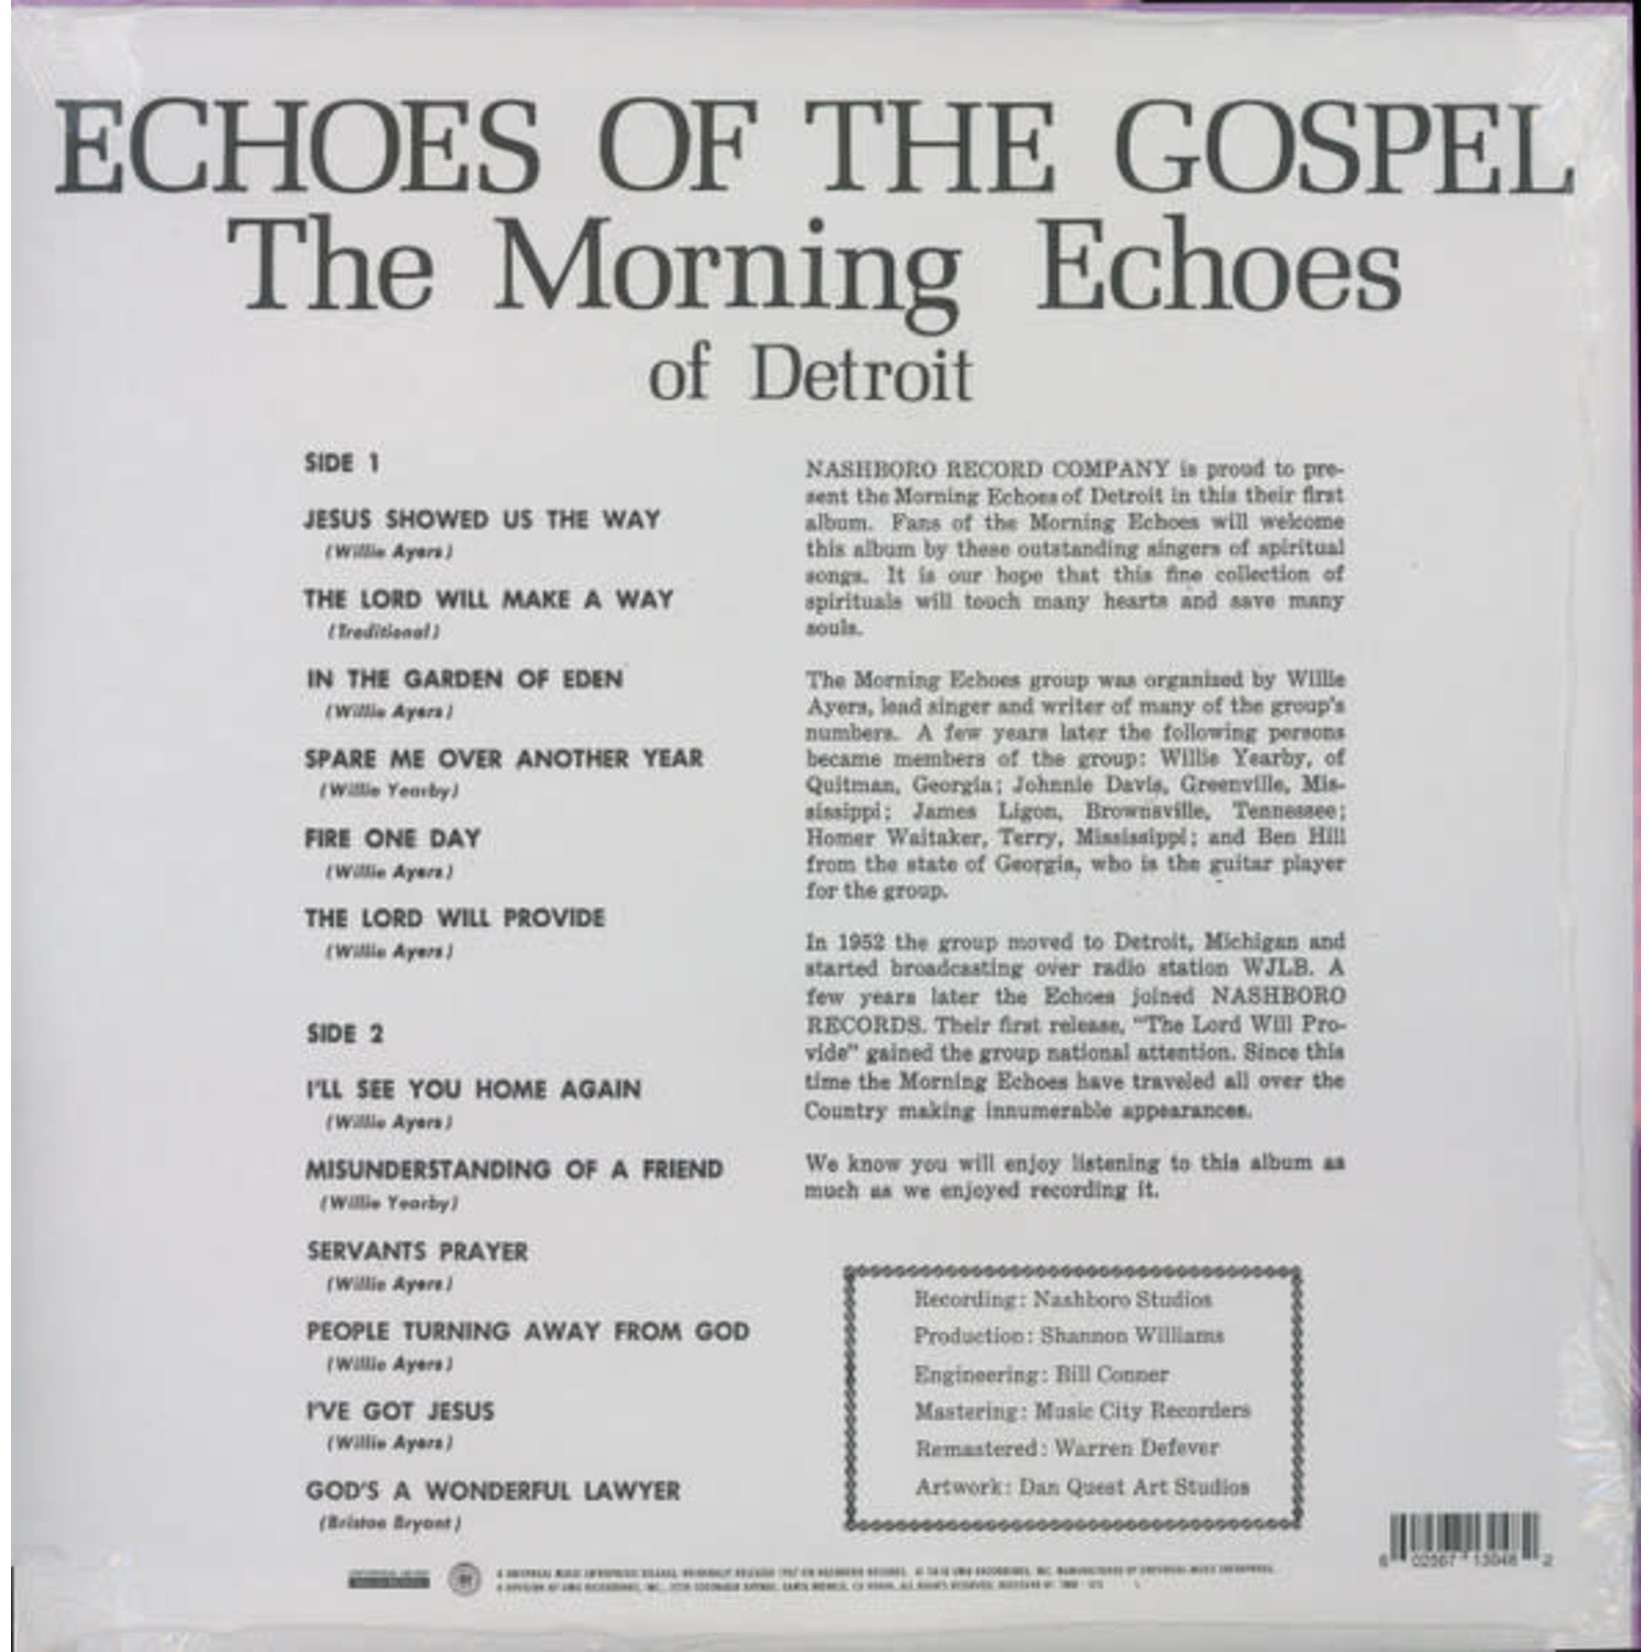 Third Man Morning Echoes of Detroit - Echoes of the Gospel (LP)